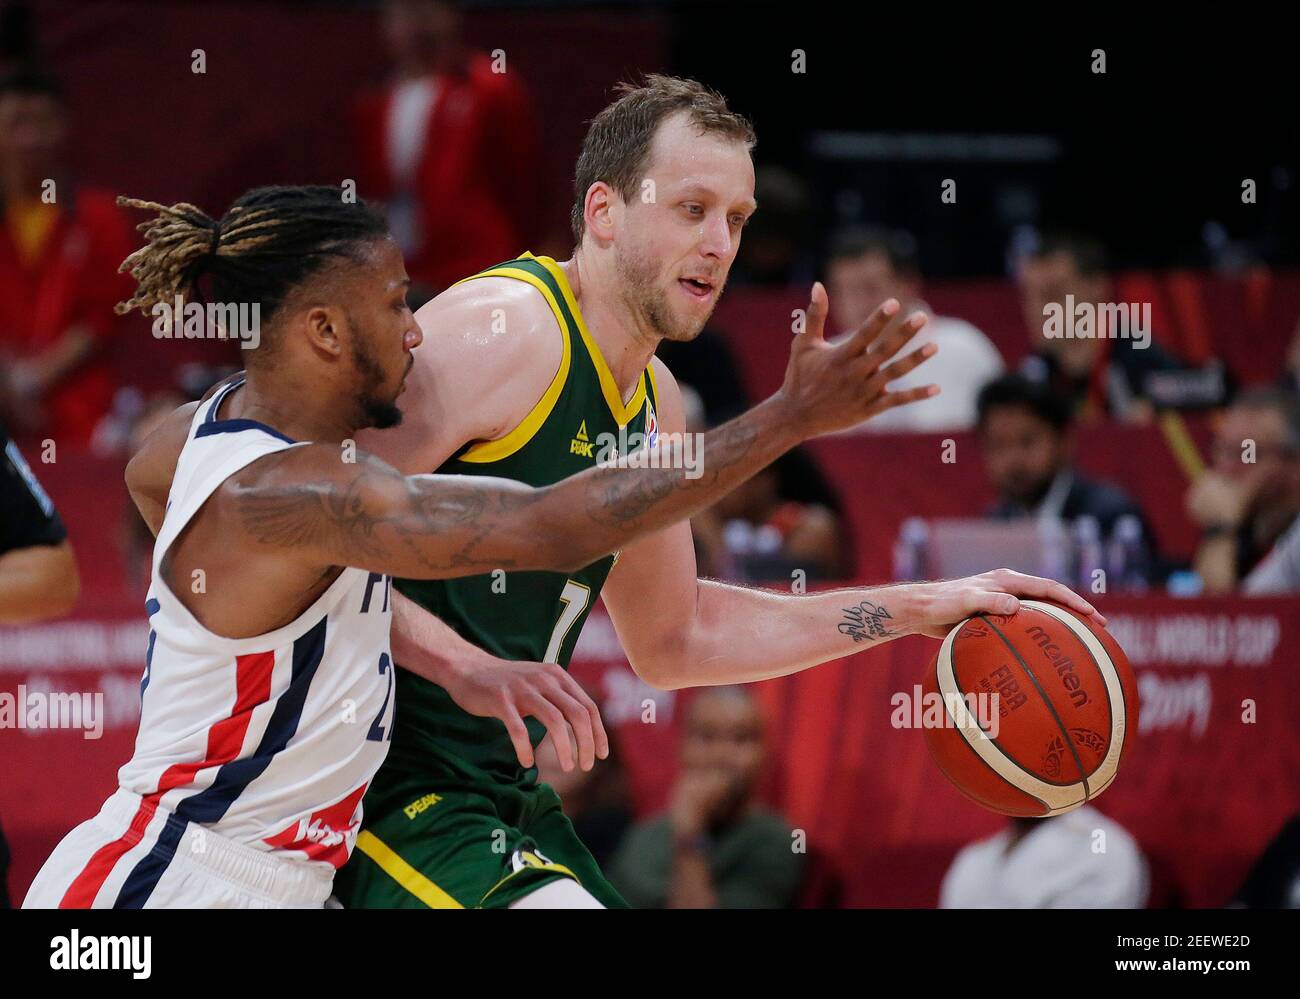 Basketball - FIBA World Cup - 3rd Place Game - France v Australia - Wukesong Sport Arena, Beijing, China - September 15, 2019  Australia's Joe Ingles in action with France's Andrew Albicy REUTERS/Jason Lee Stock Photo